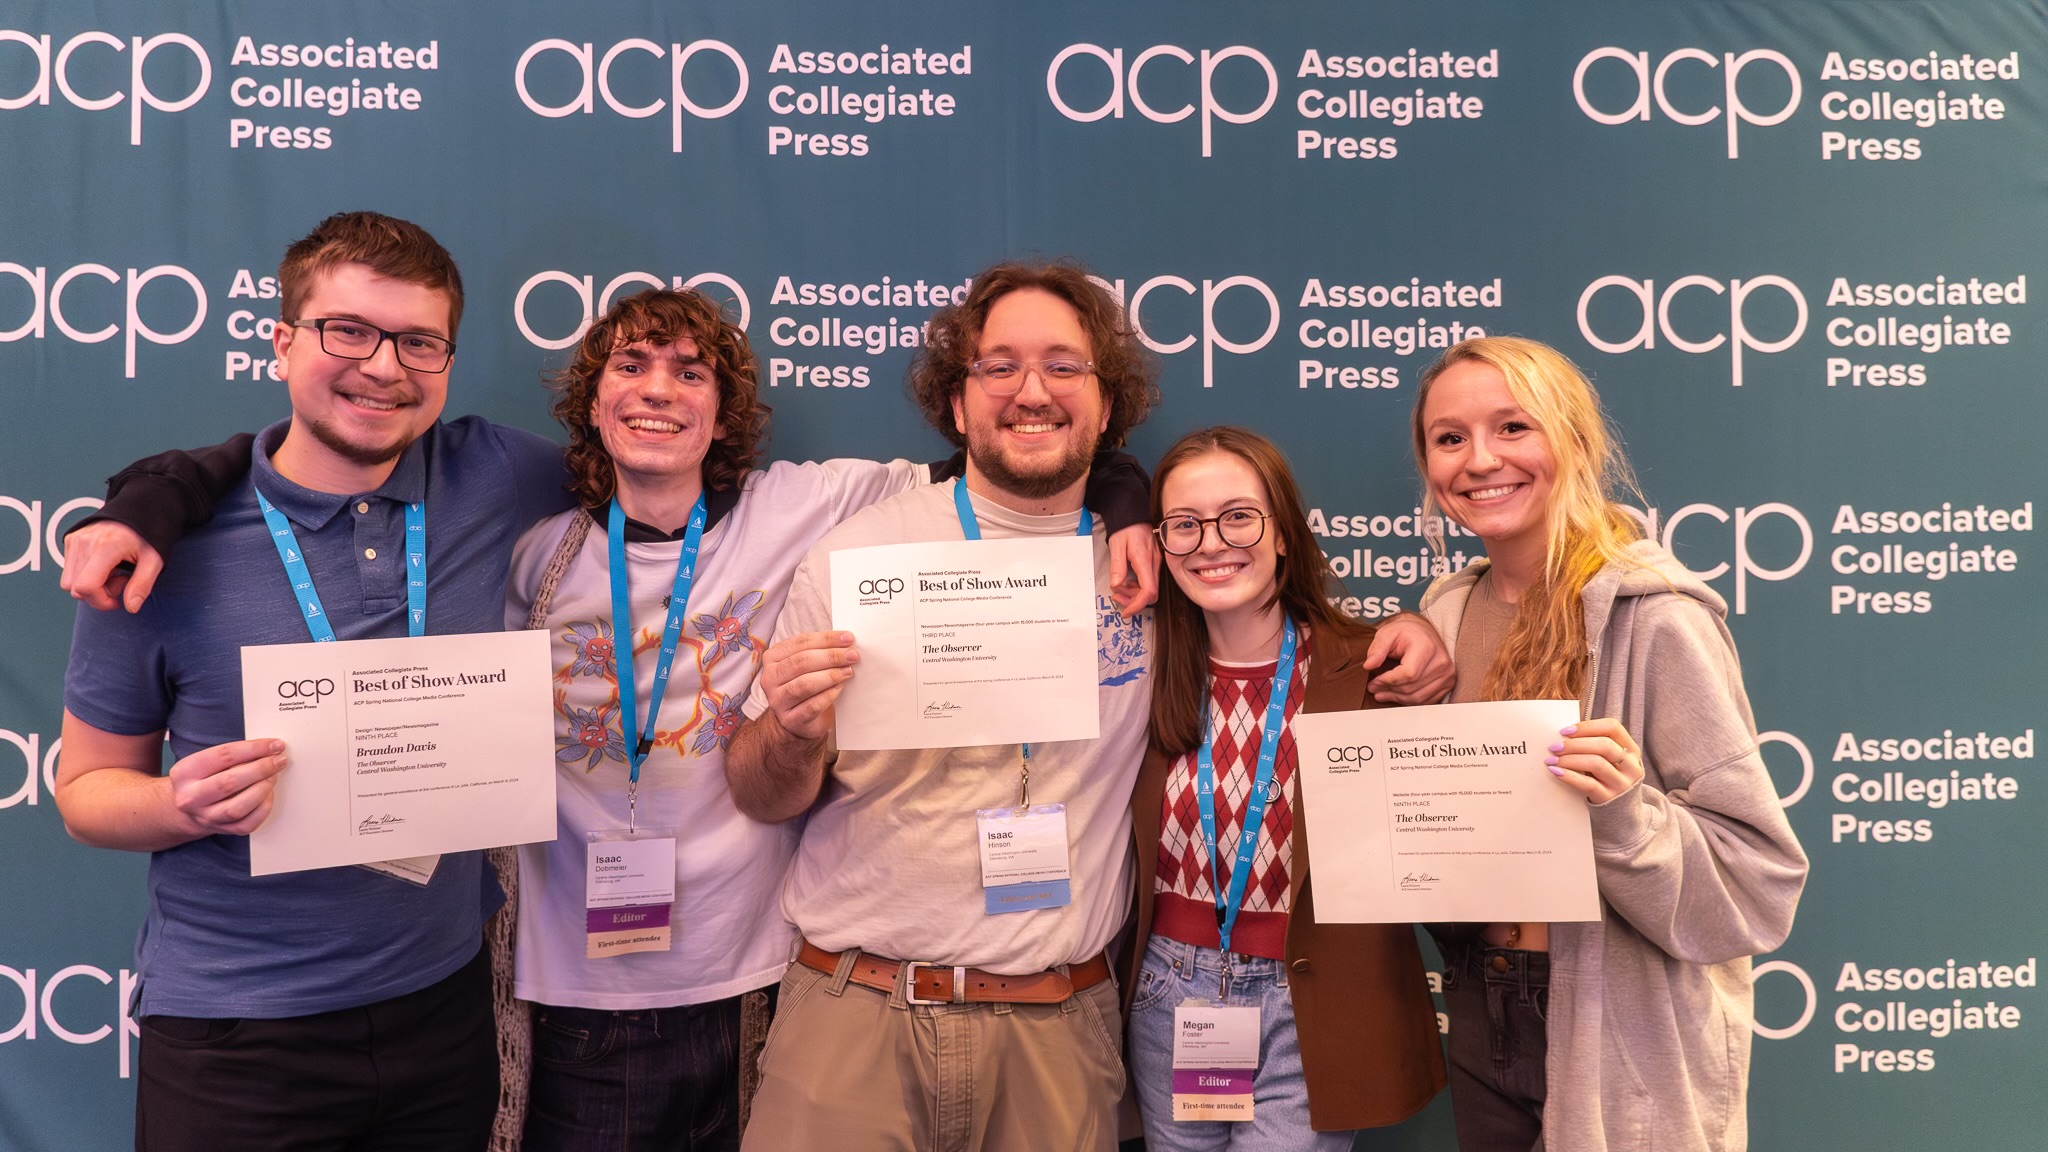 Photo of The Observer's delegation to this year's ACP conference.